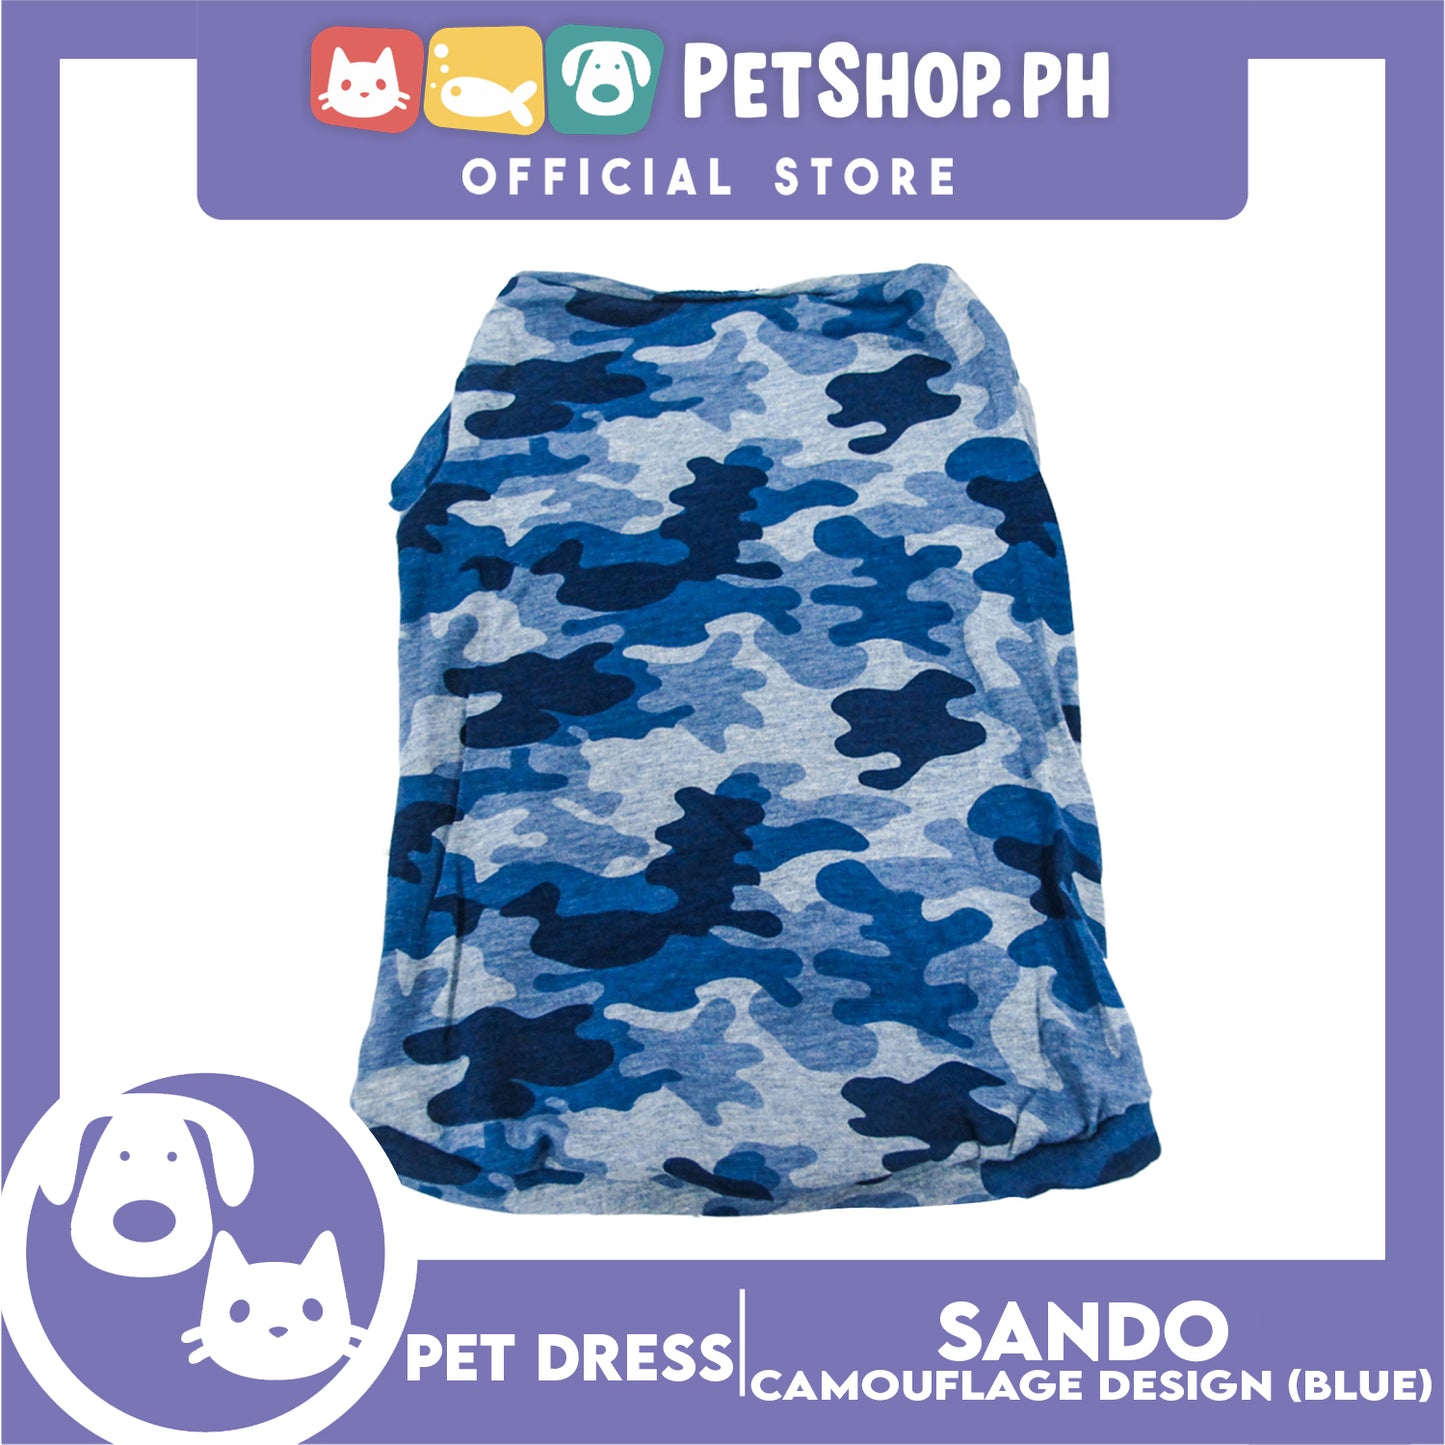 Pet Shirt Camouflage Design Sleeveless Blue (Large) for Puppy, Small Dog and Cat- Sando Breathable Clothes, Pet T-shirt